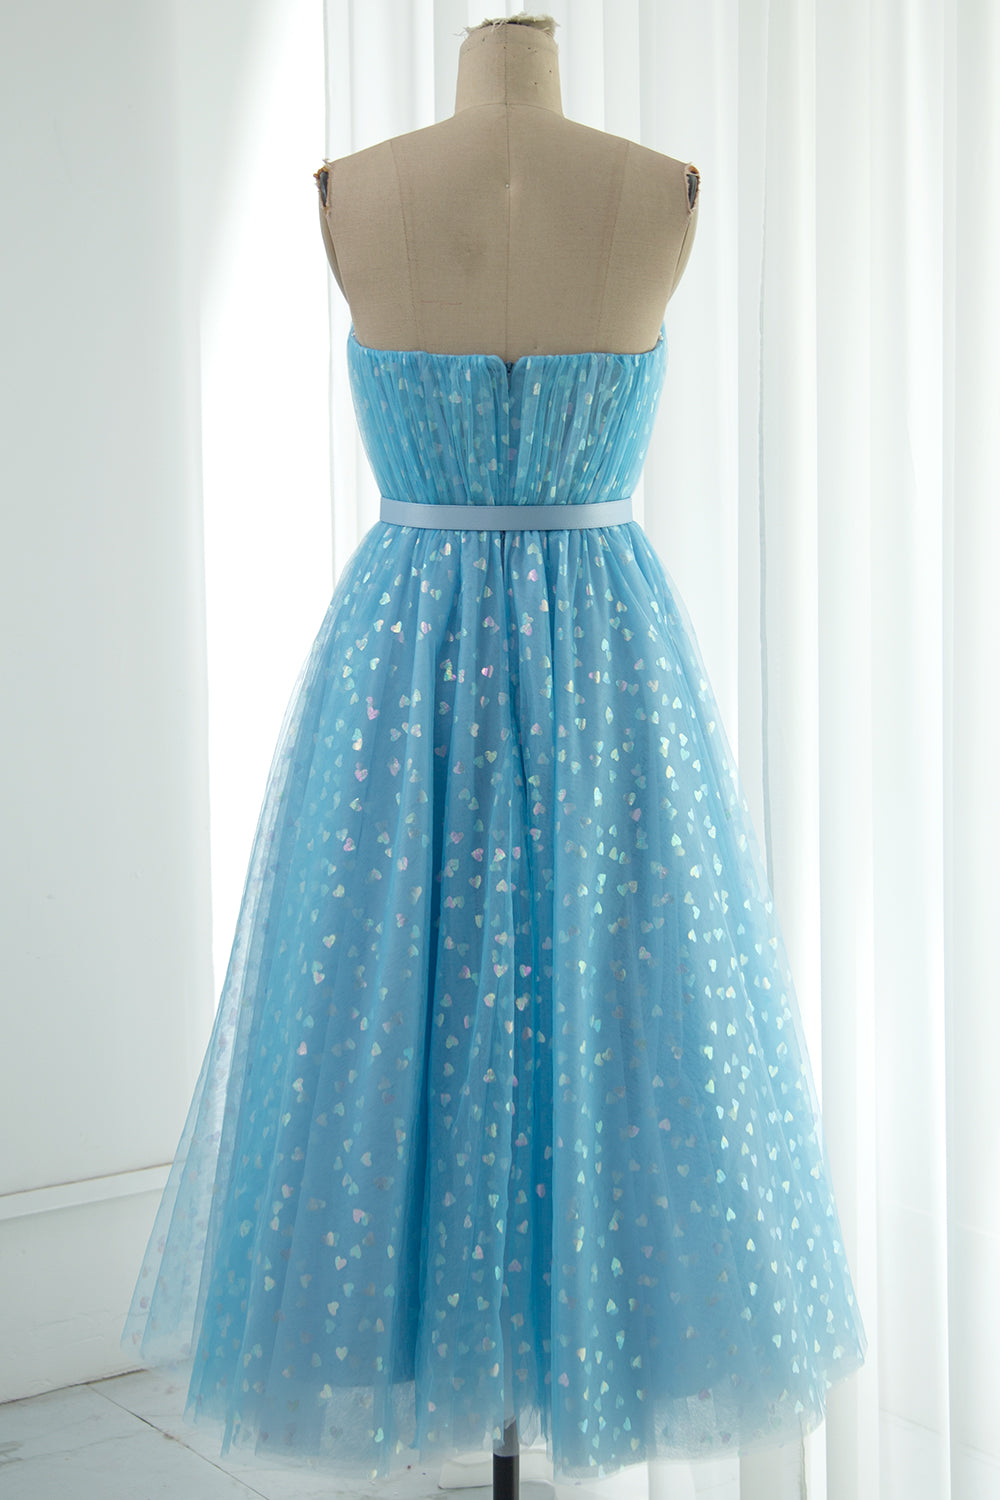 MissJophiel Sweetheart Tulle Prom Dress with Belt (include Removable Straps, Bow)